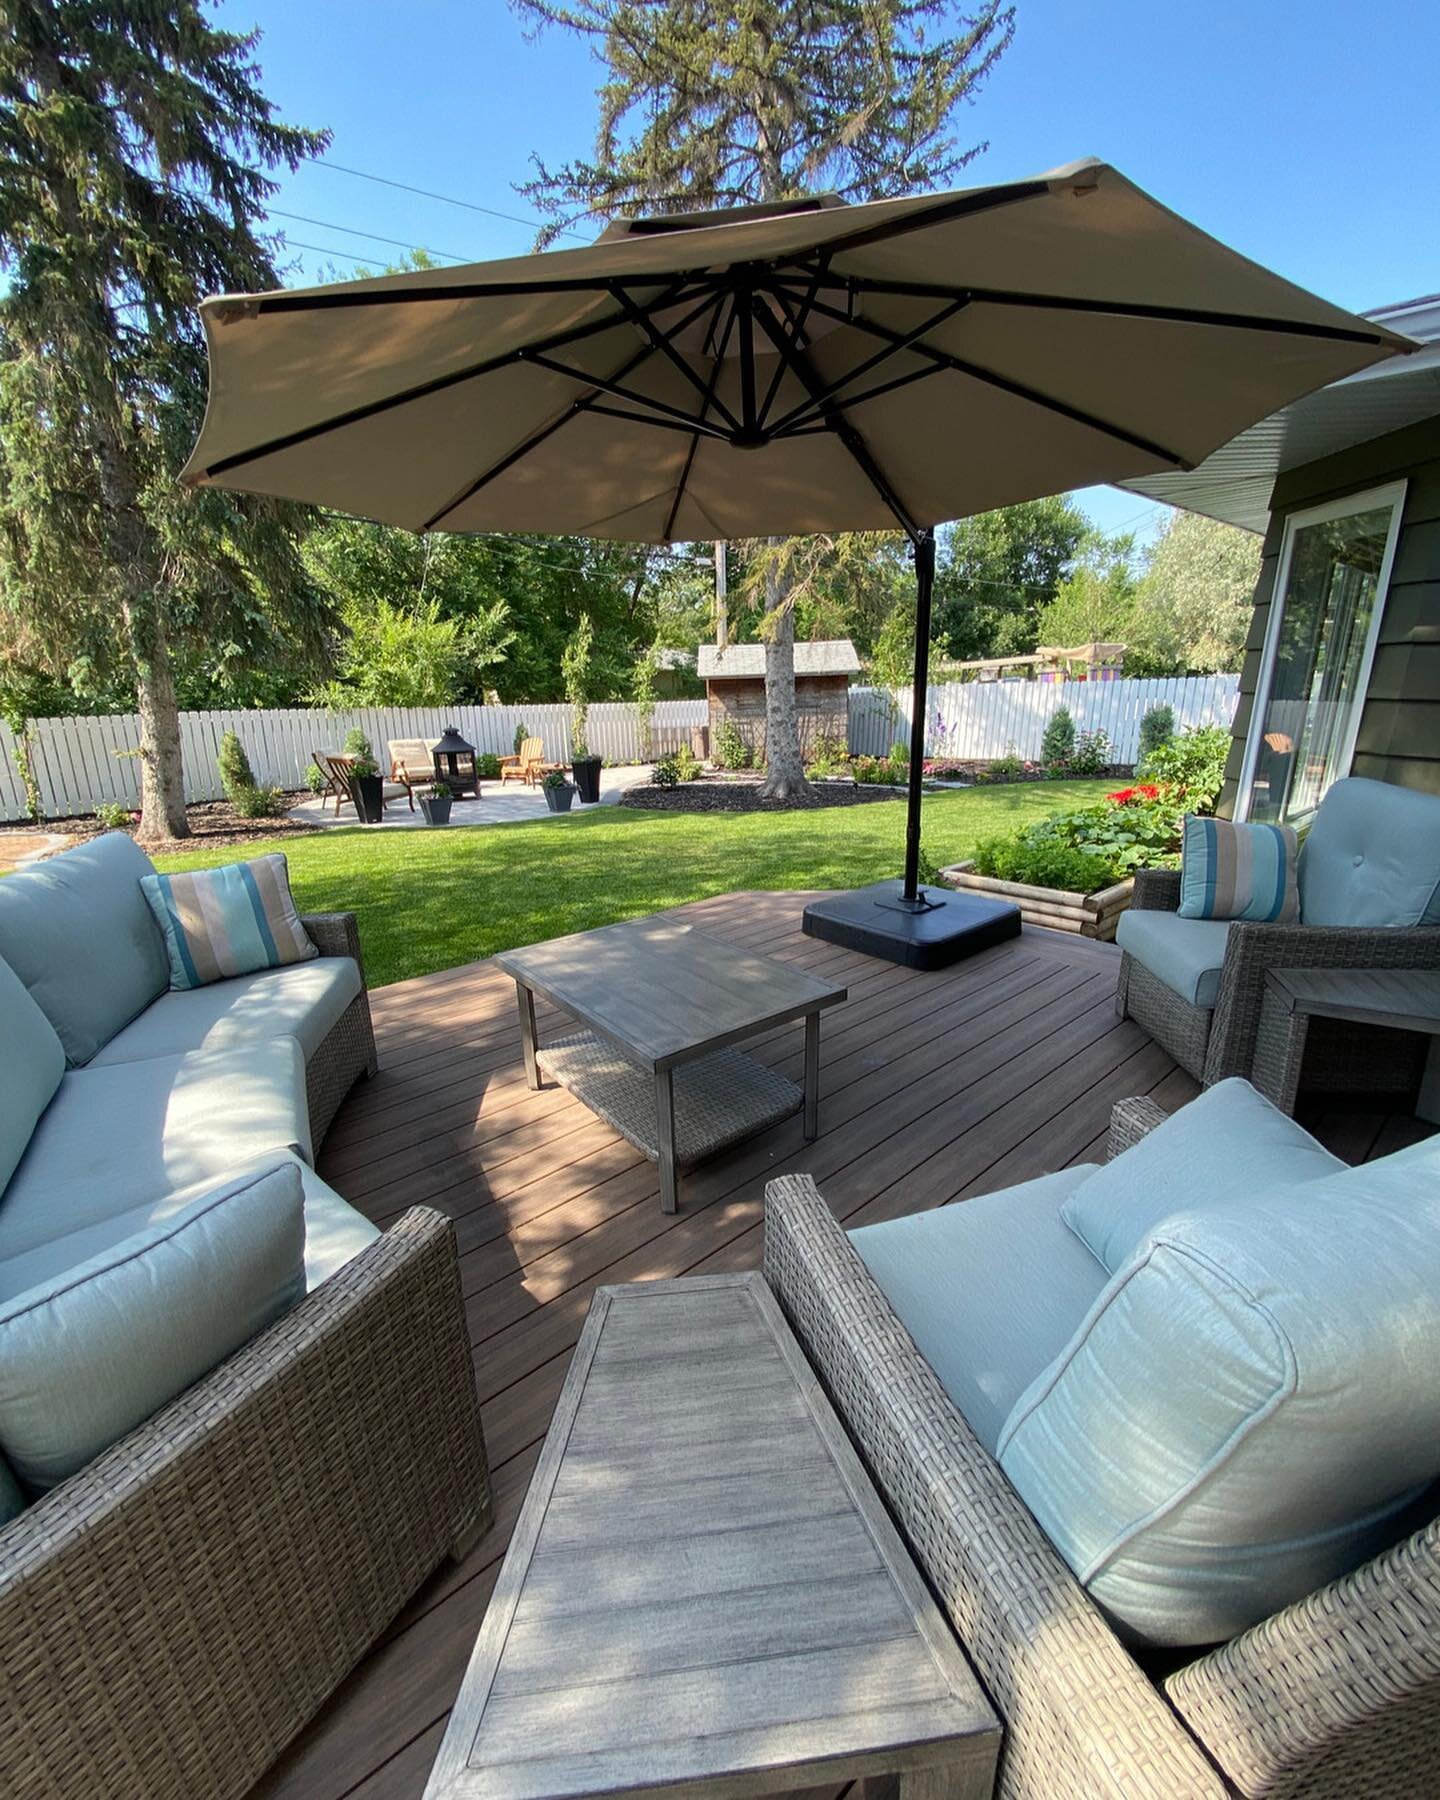 It's important to plan for all the views. What do you look out at from the window the other 8 months of the year that you aren't on your deck or patio? 
I love to plan for the yard to look amazing in the summer but let's consider the rest of the seas